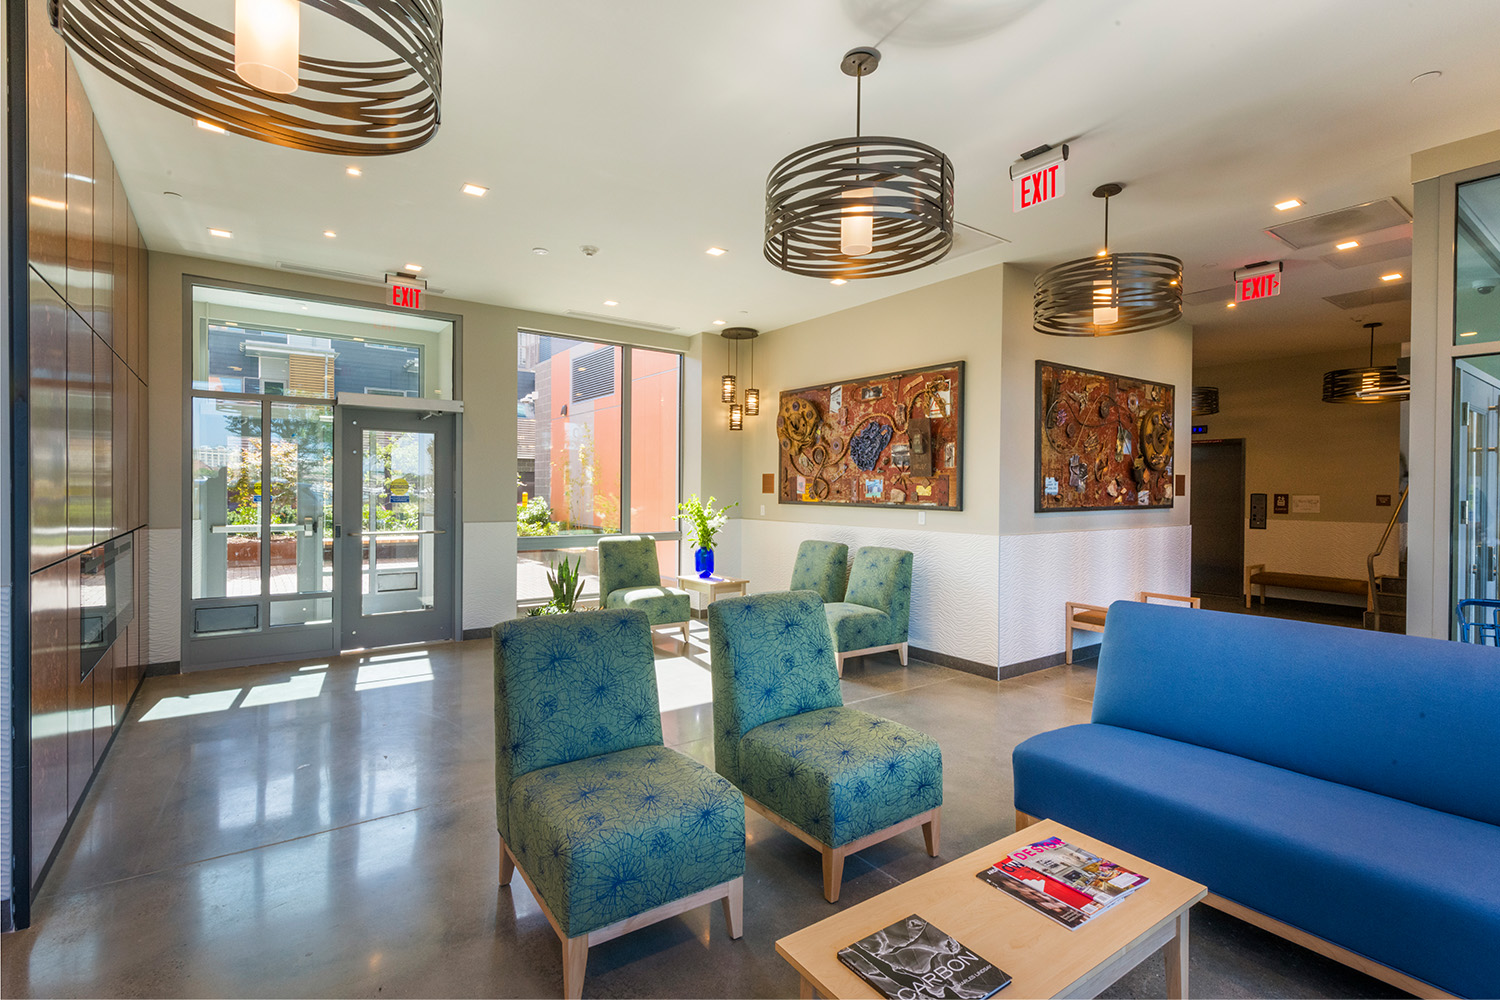 Lobby with elegant light fixtures, and blue couch and chairs